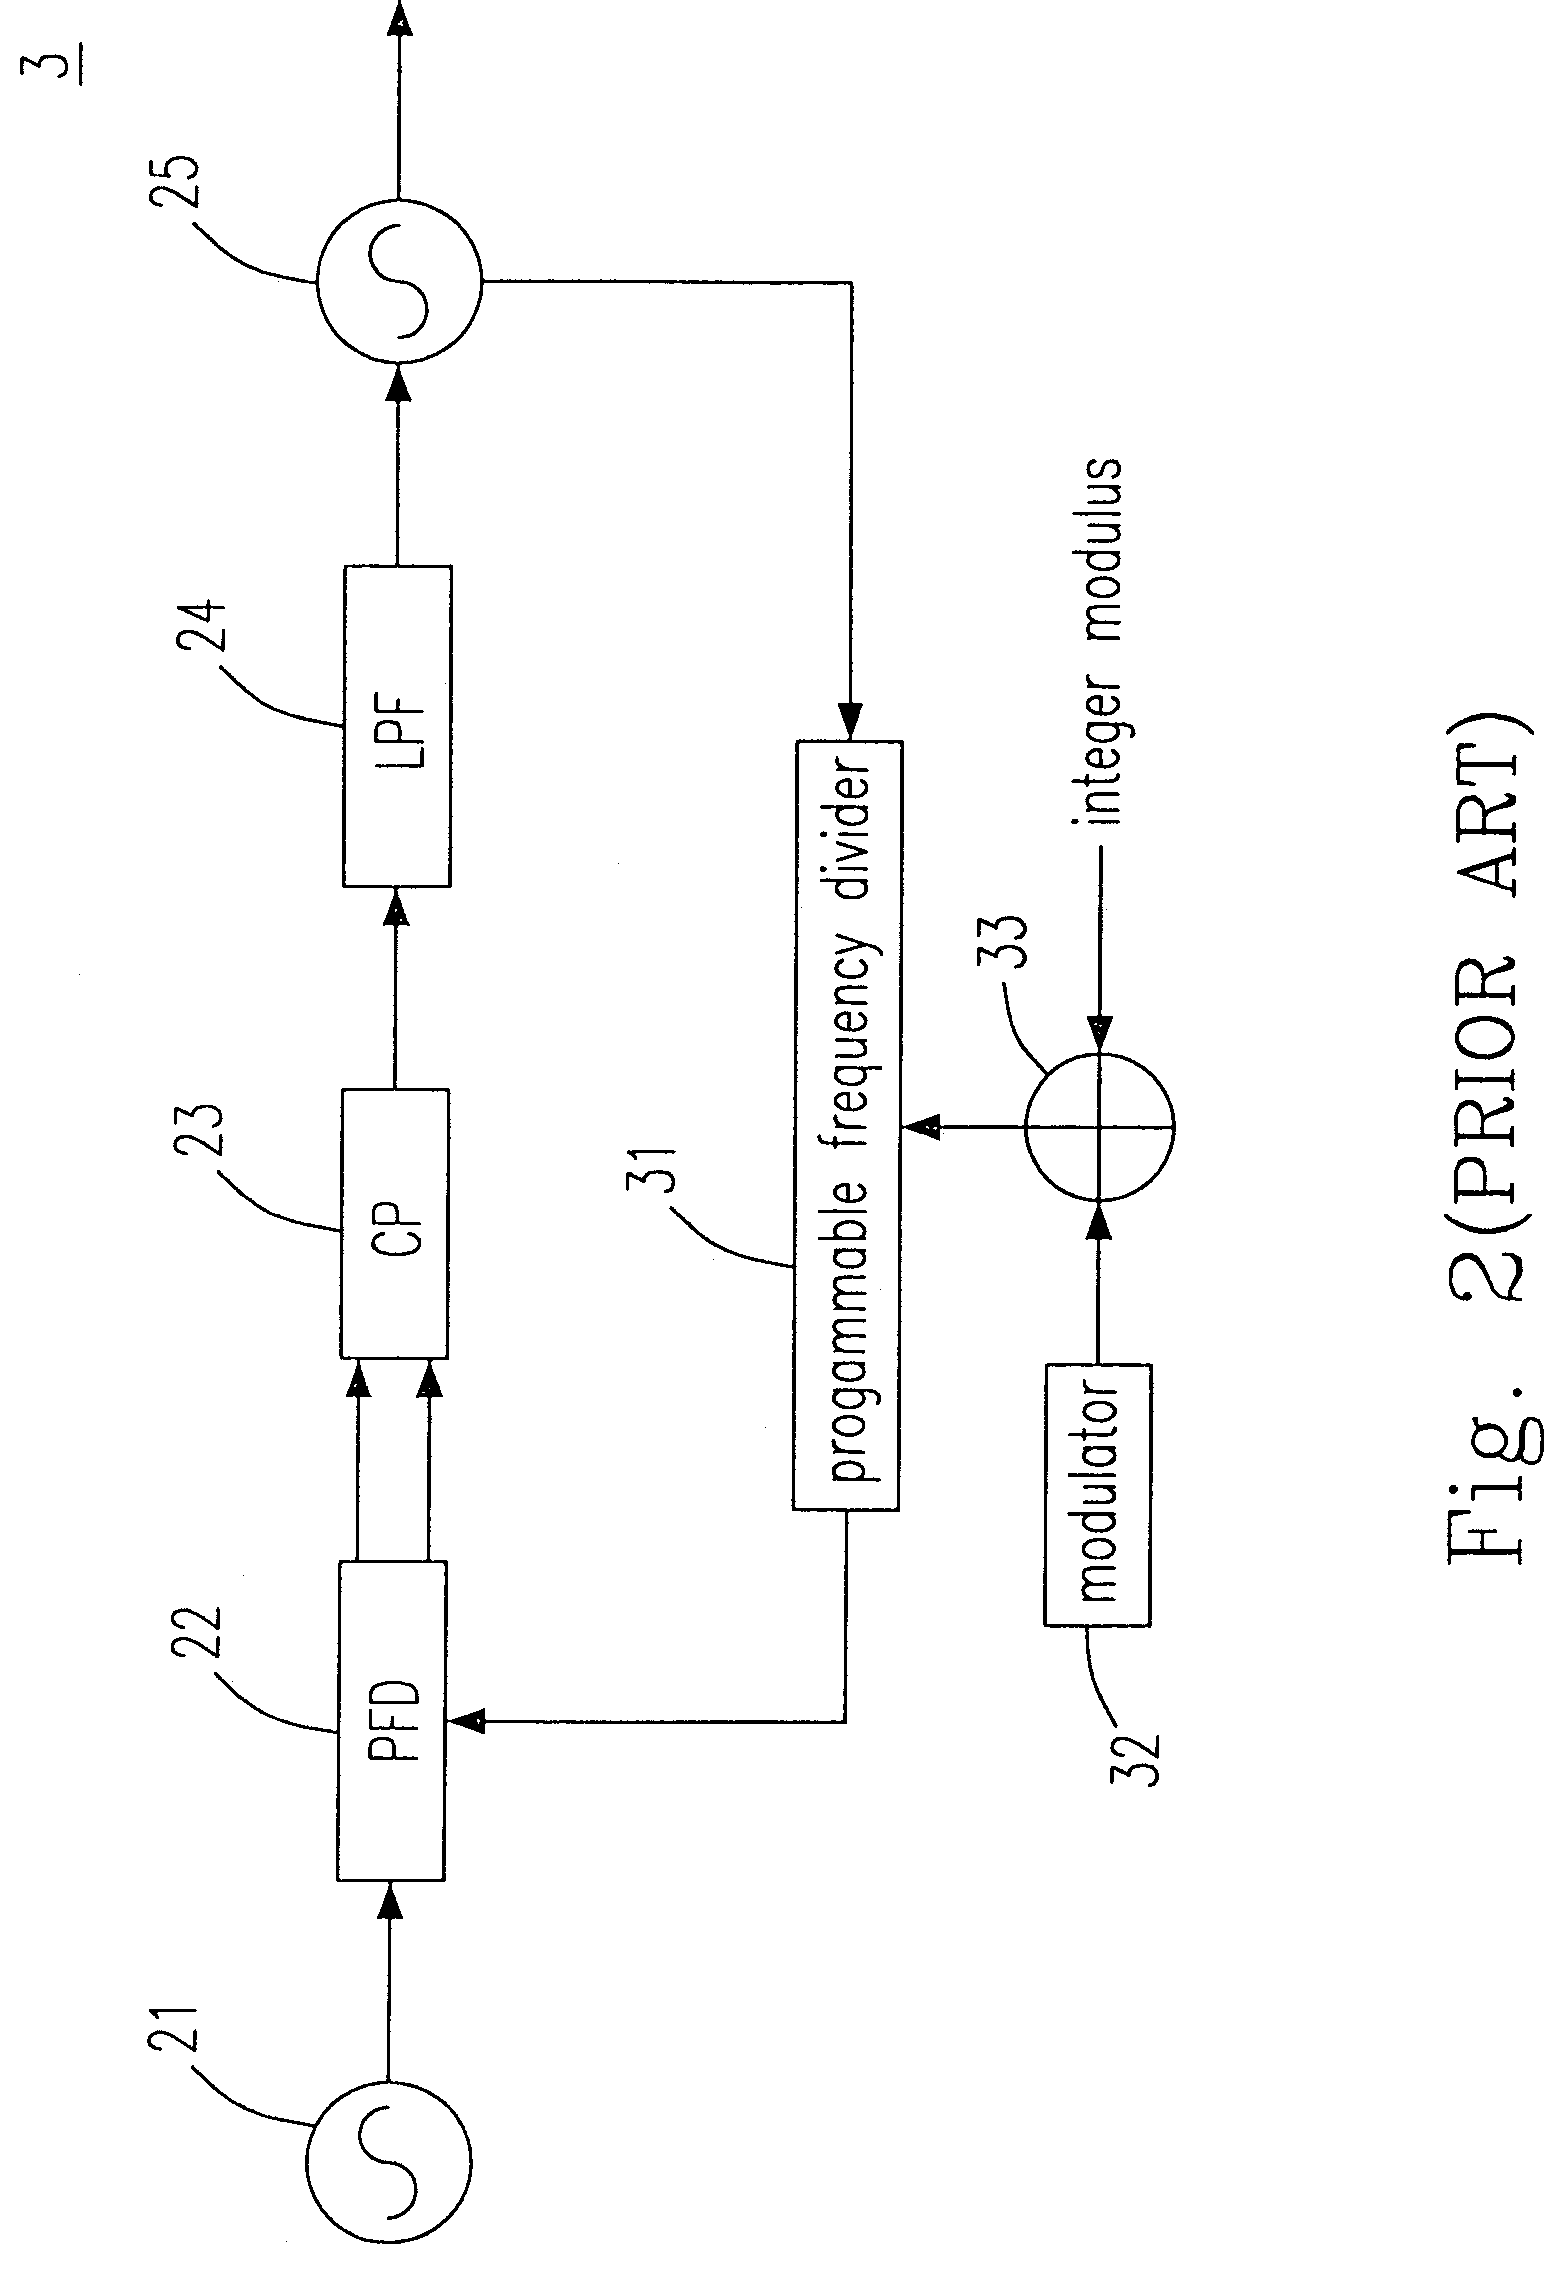 Configuration and controlling method of fractional-N PLL having fractional frequency divider